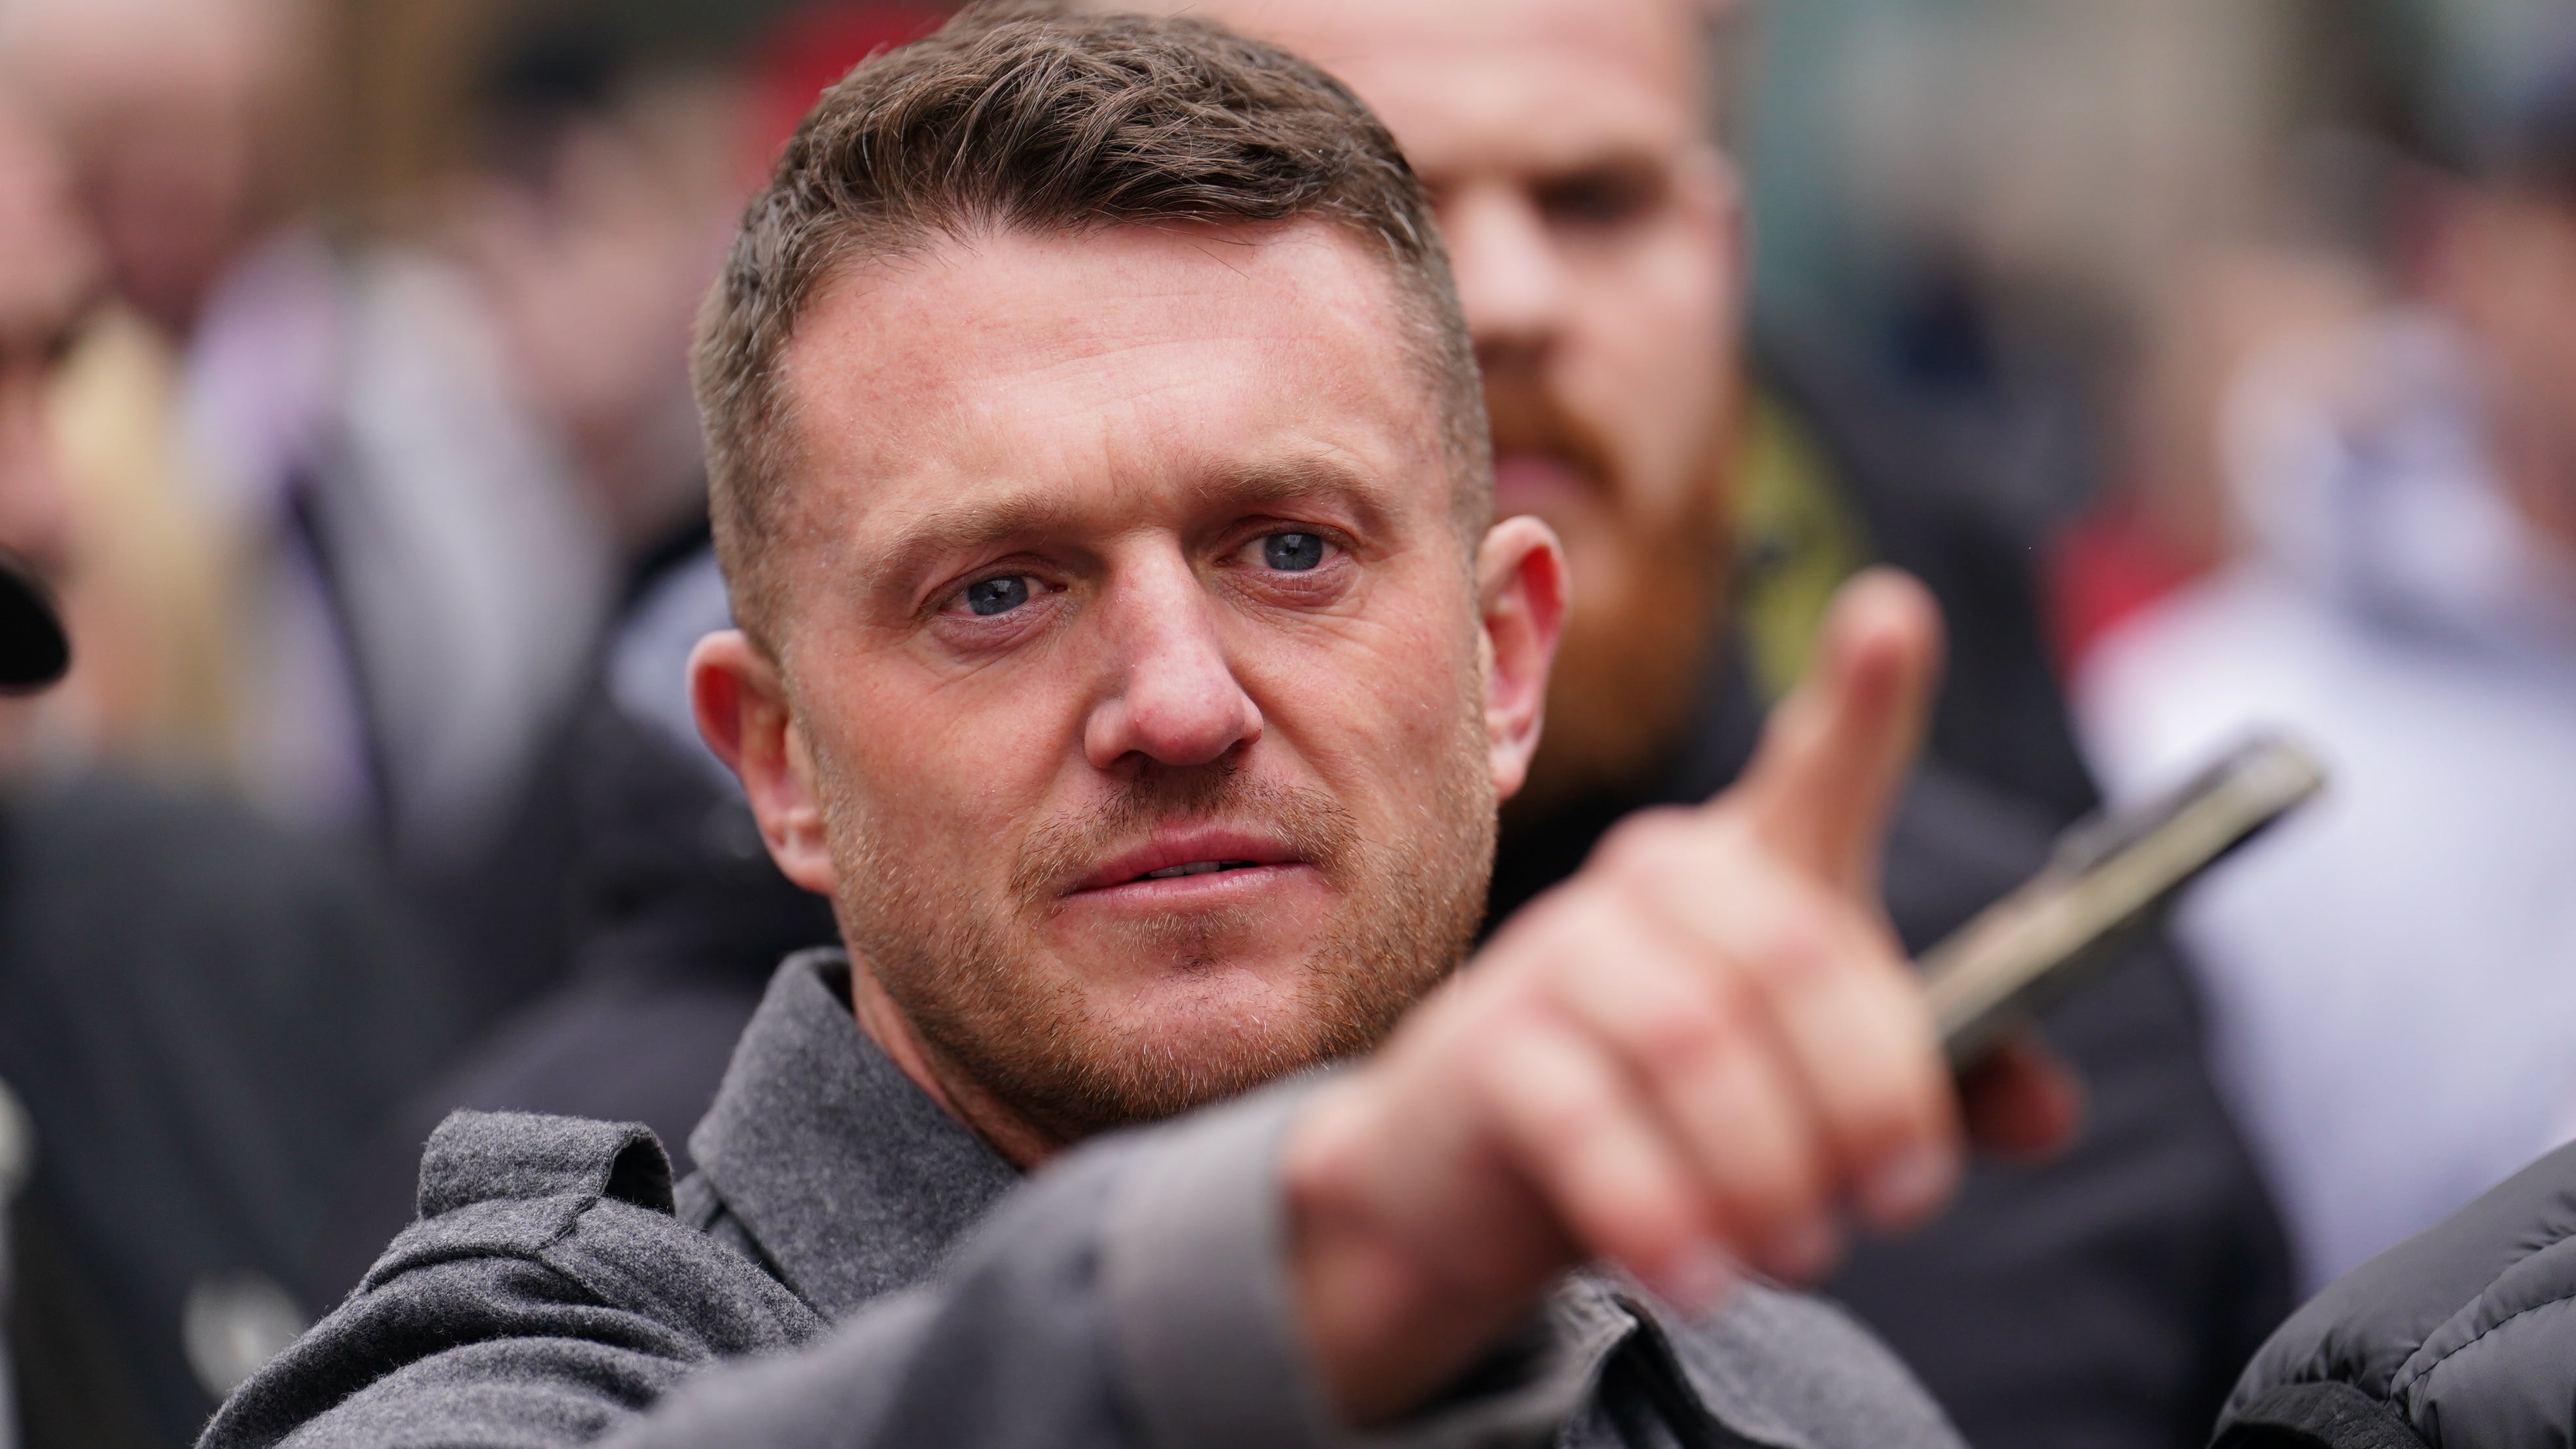 Tommy Robinson said he had been ordered to hand in his passport and told not to leave Canada after being arrested on suspicion of immigration offences